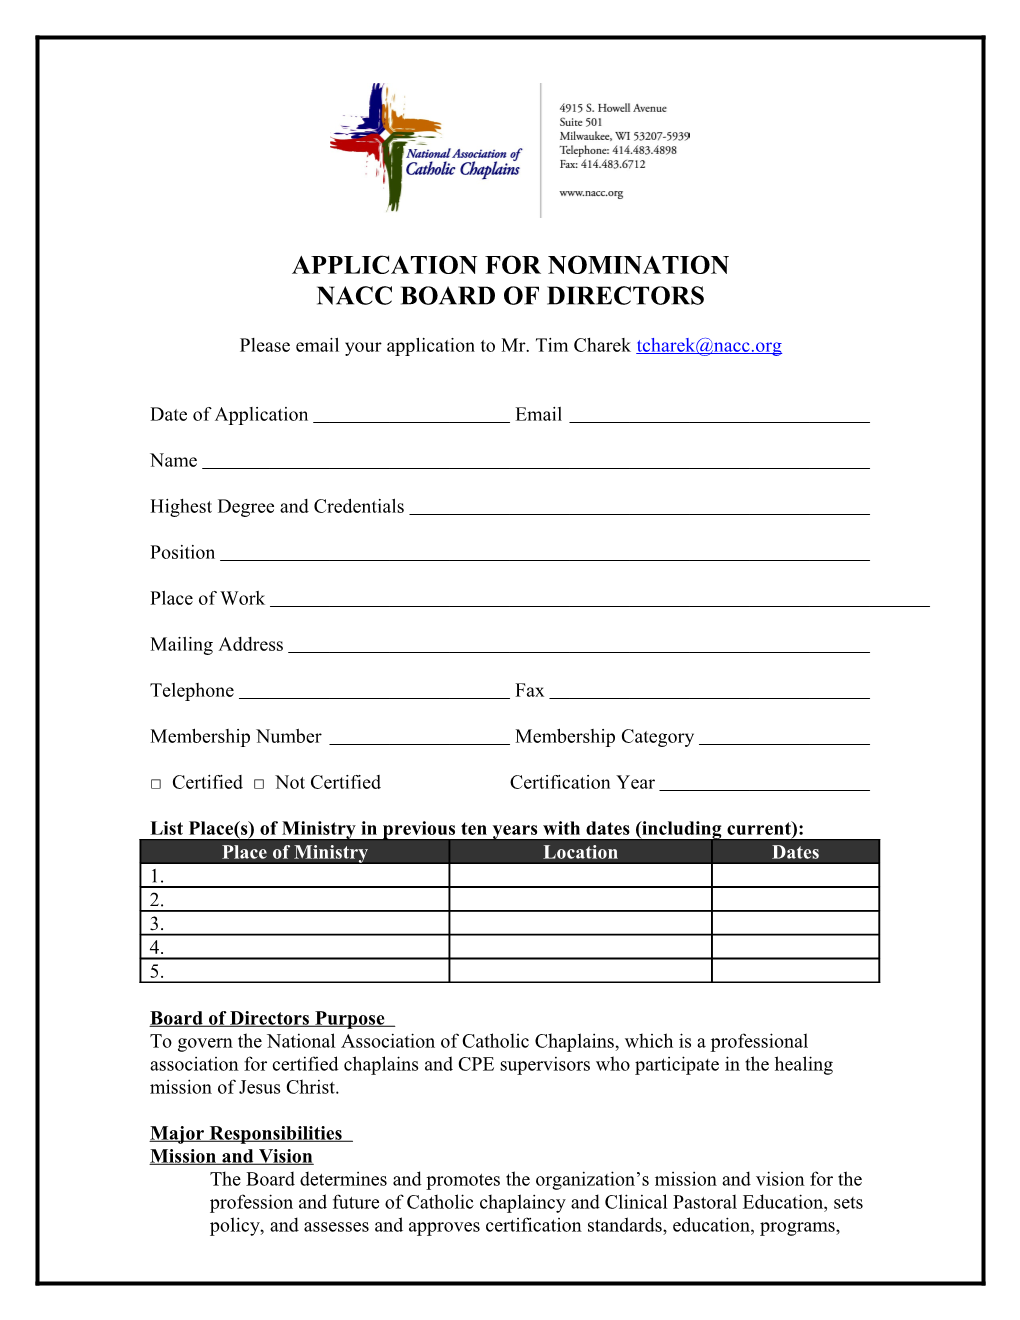 Application for Nomination